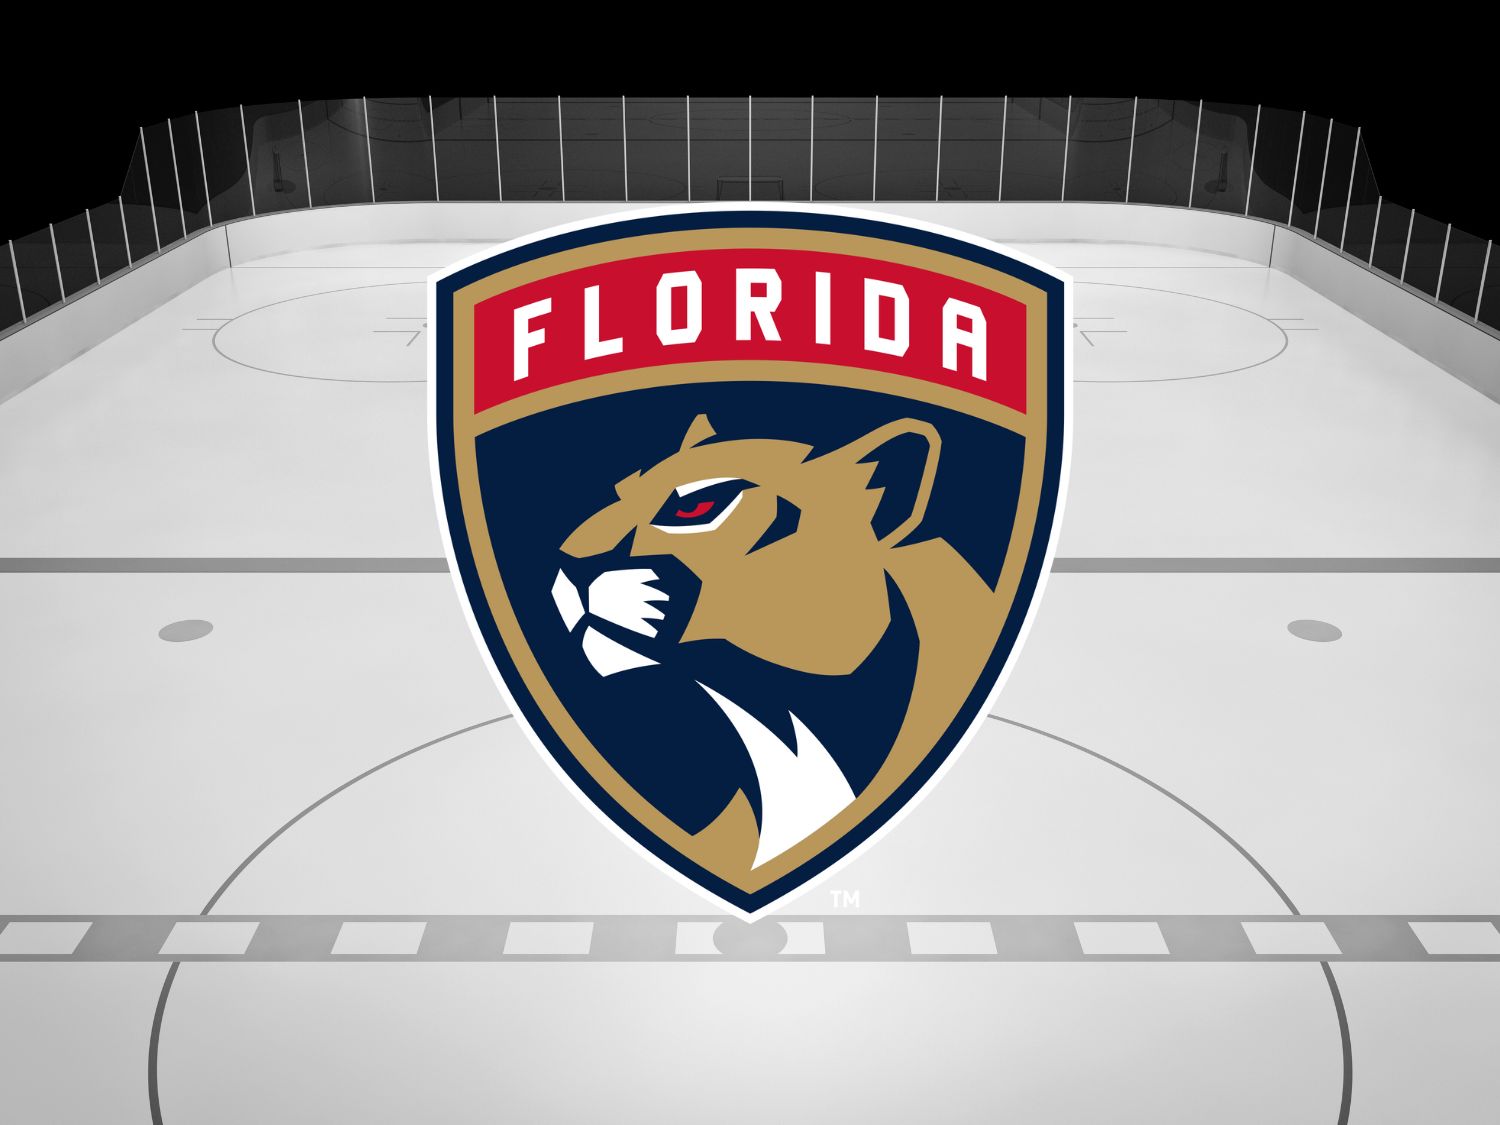 Florida Panthers Tickets